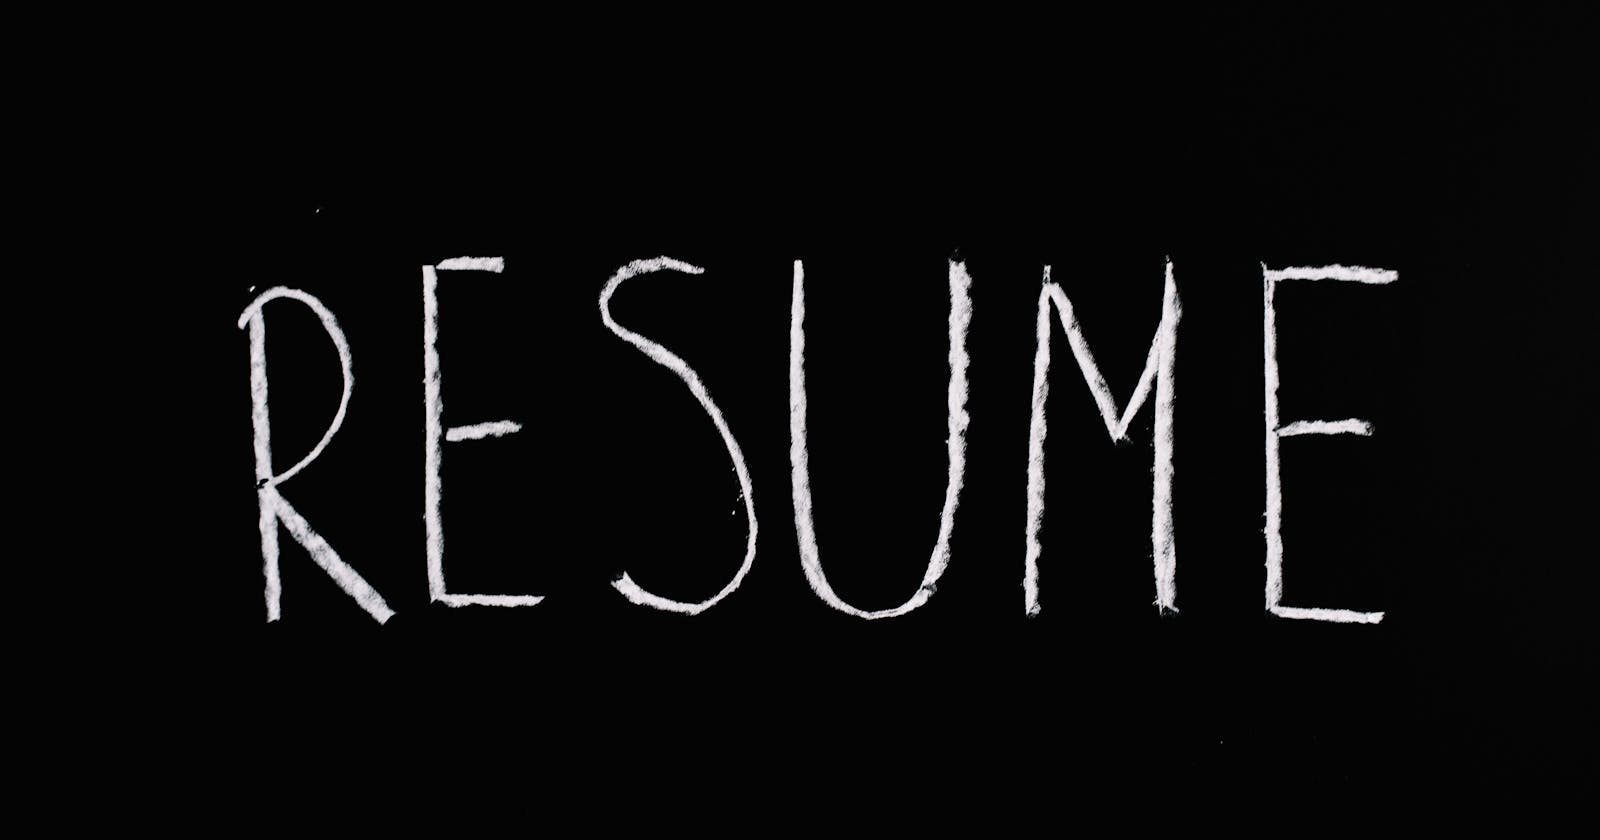 How to write an amazing resume summary statement